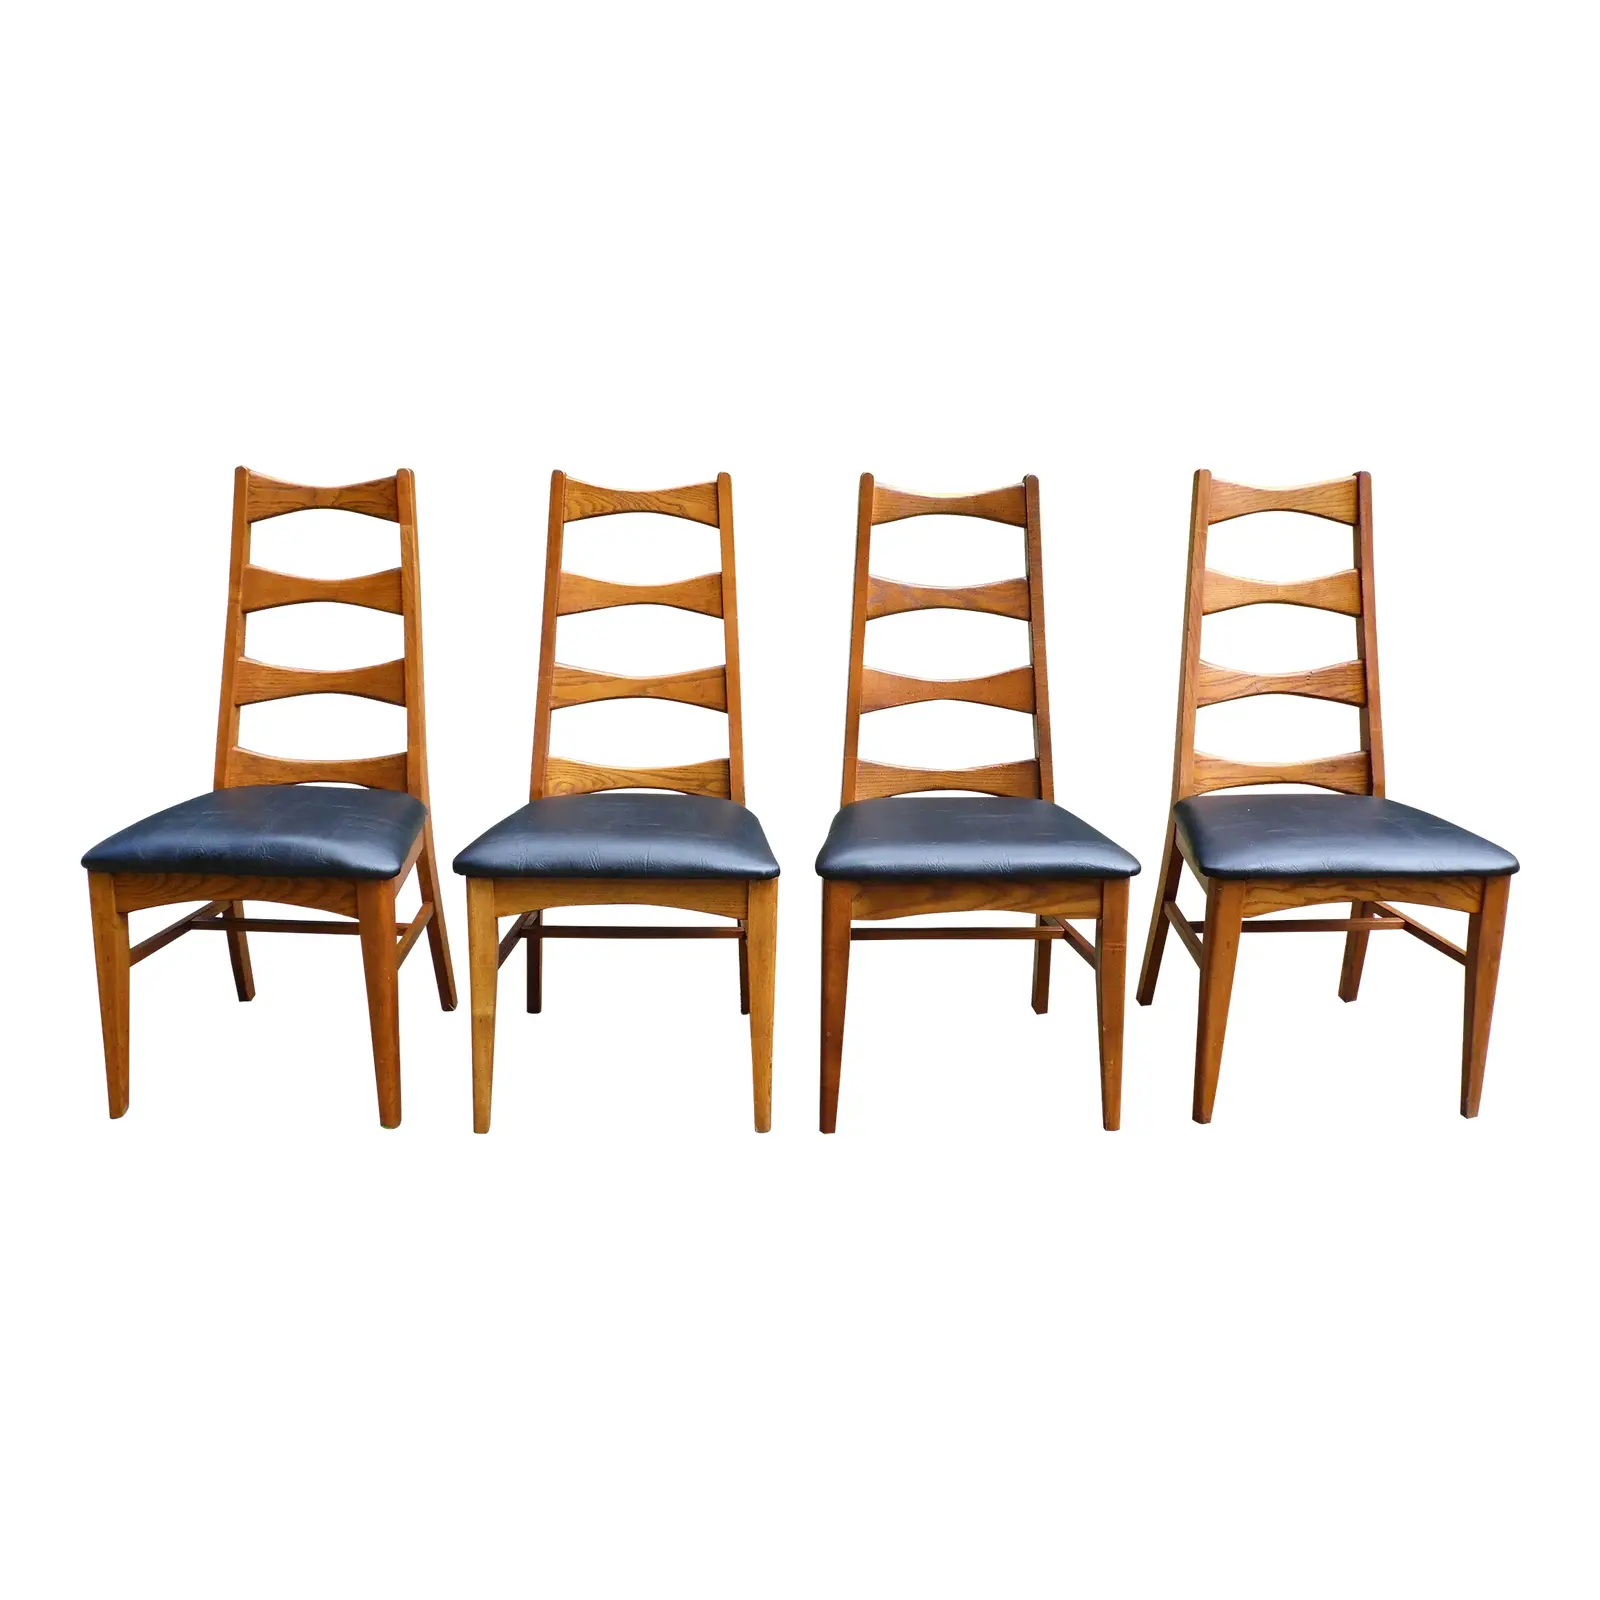 https://deco2modern.com/wp-content/uploads/2023/03/vintage-set-of-4-mid-century-modern-solid-oak-dining-chairs-liberty-chairs-5777.webp